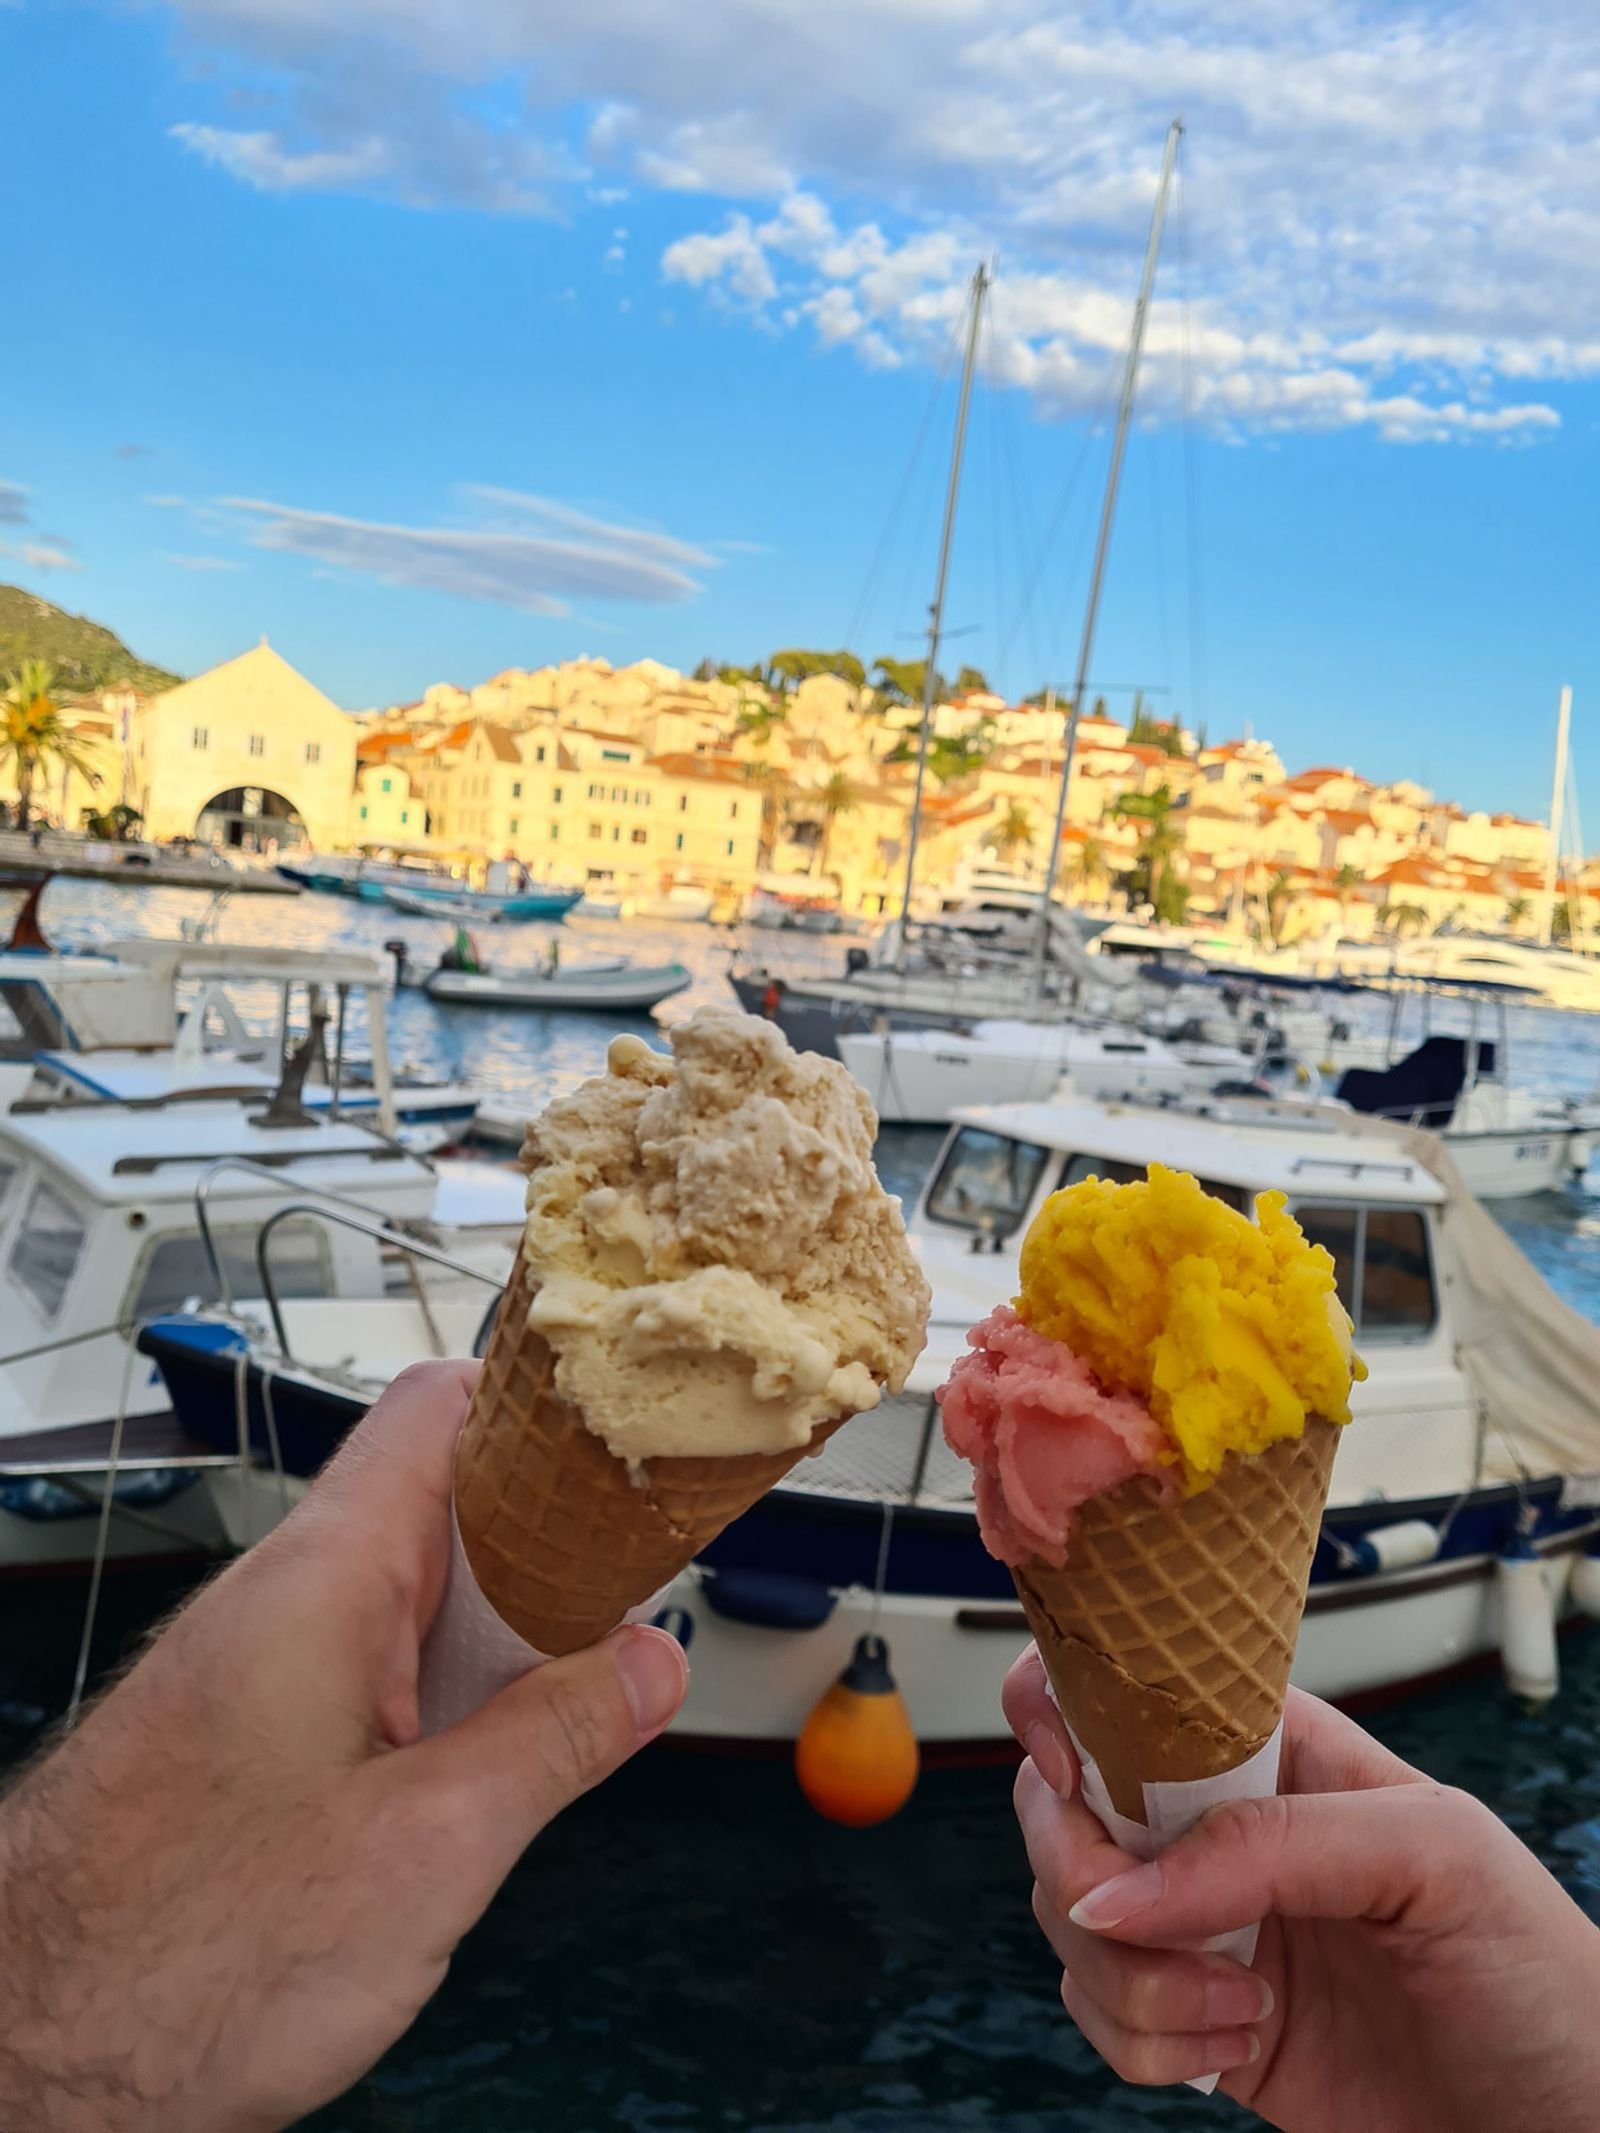 Two hands holding cones of ice cream, one is vanilla, one is pink and yellow. A blurred town in the background